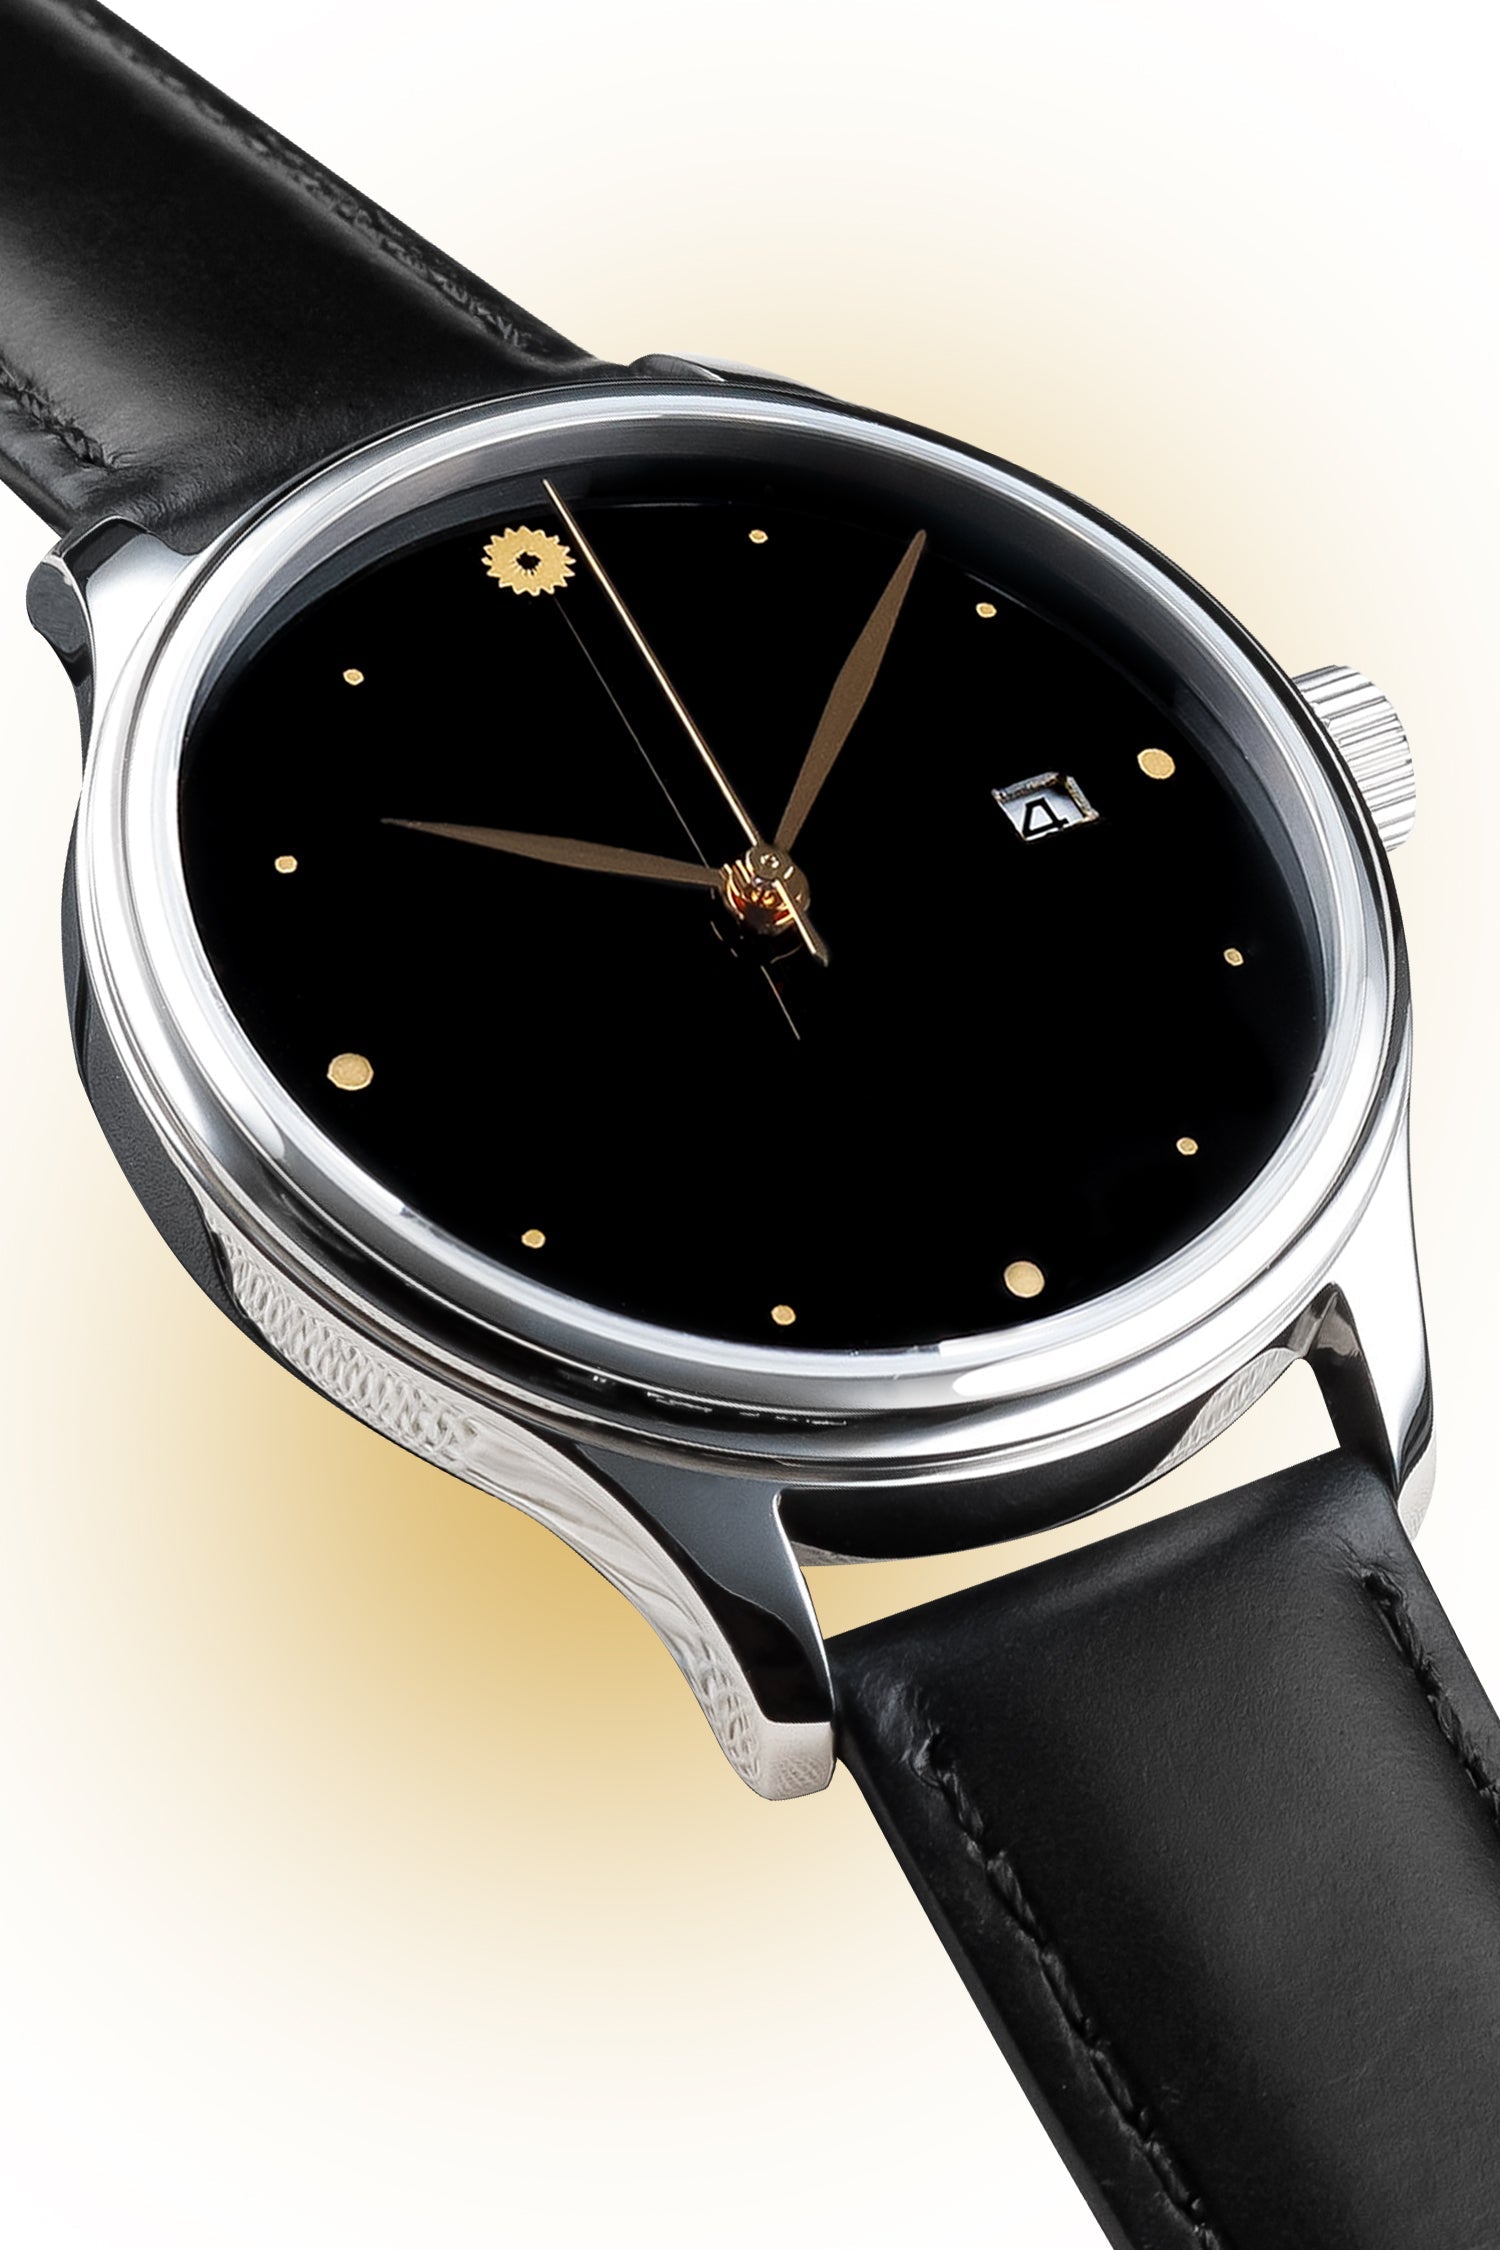 Experience exquisite Japanese craftsmanship with Wancher Watch Dream Urushi Black Lacquered Dial Automatic. Made from Echizen Japan&#39;s high-quality lacquerware, it features intricate design and automatic movement. Own a piece of Japan&#39;s cultural heritage and add sophistication to your wardrobe.